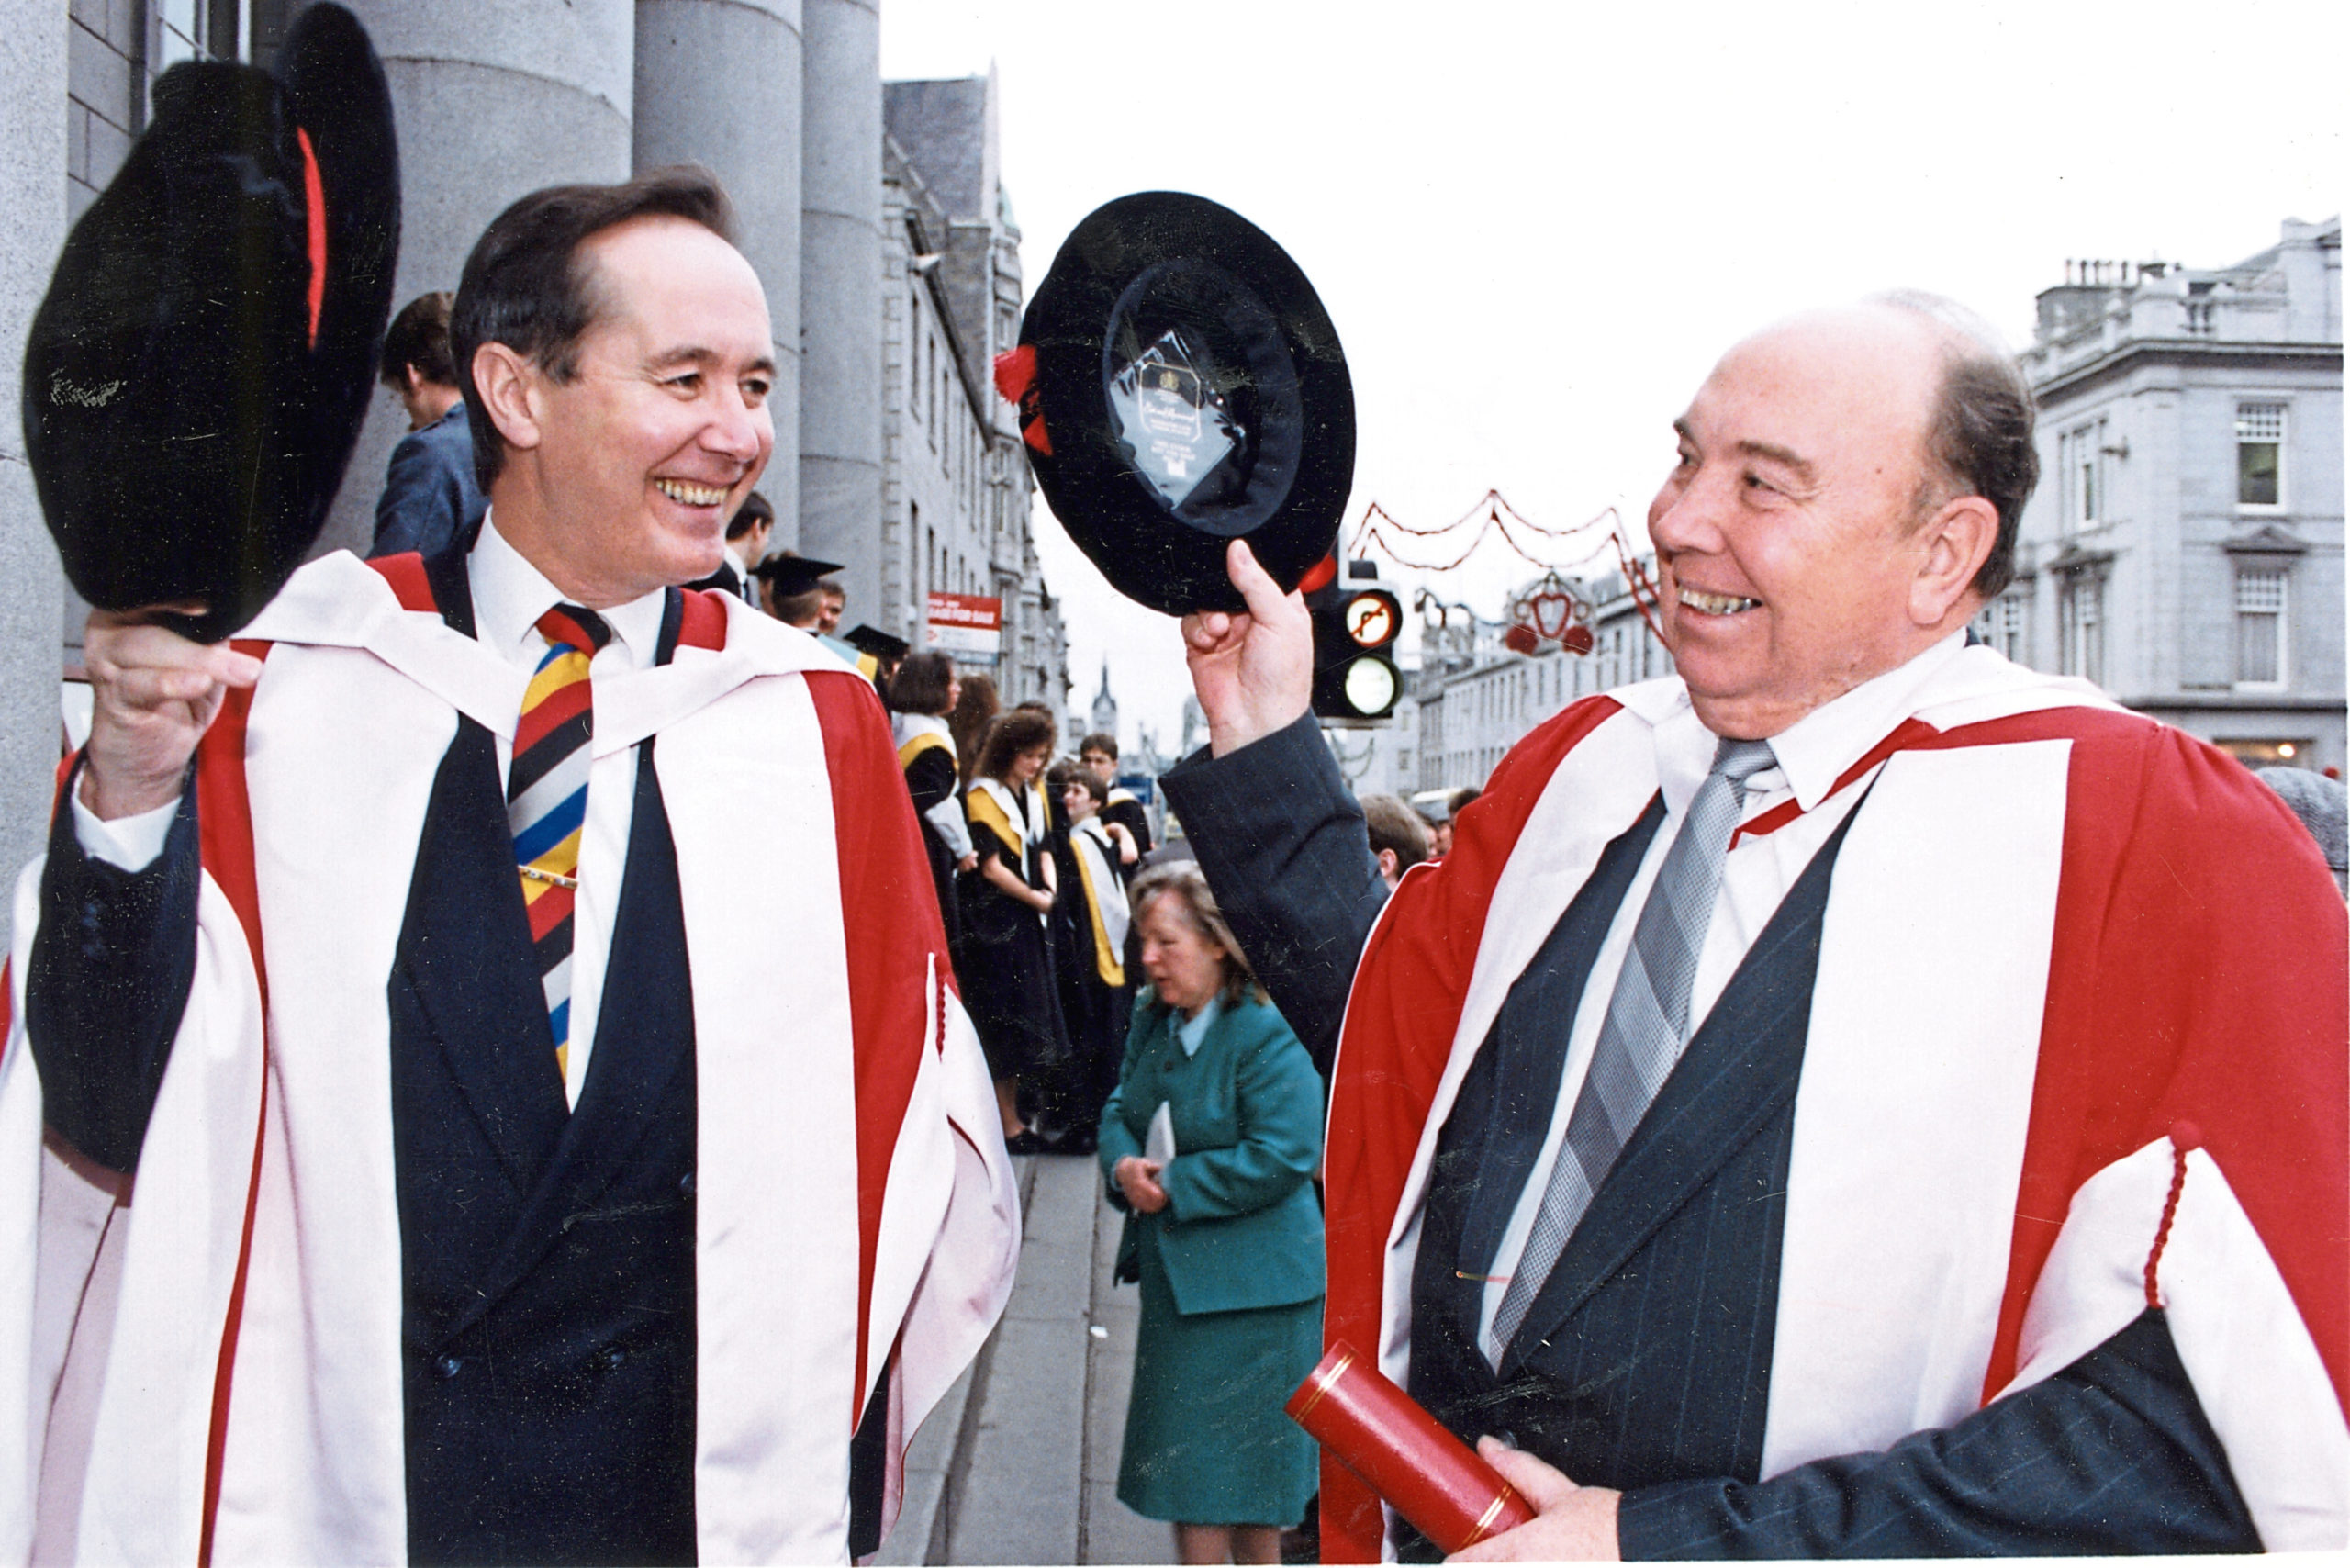 Aberdeen Lord Provost James Wyness and Regional Council convener Robert Middleton were made honorary Doctors of Letters at a special graduations ceremony in 1992.